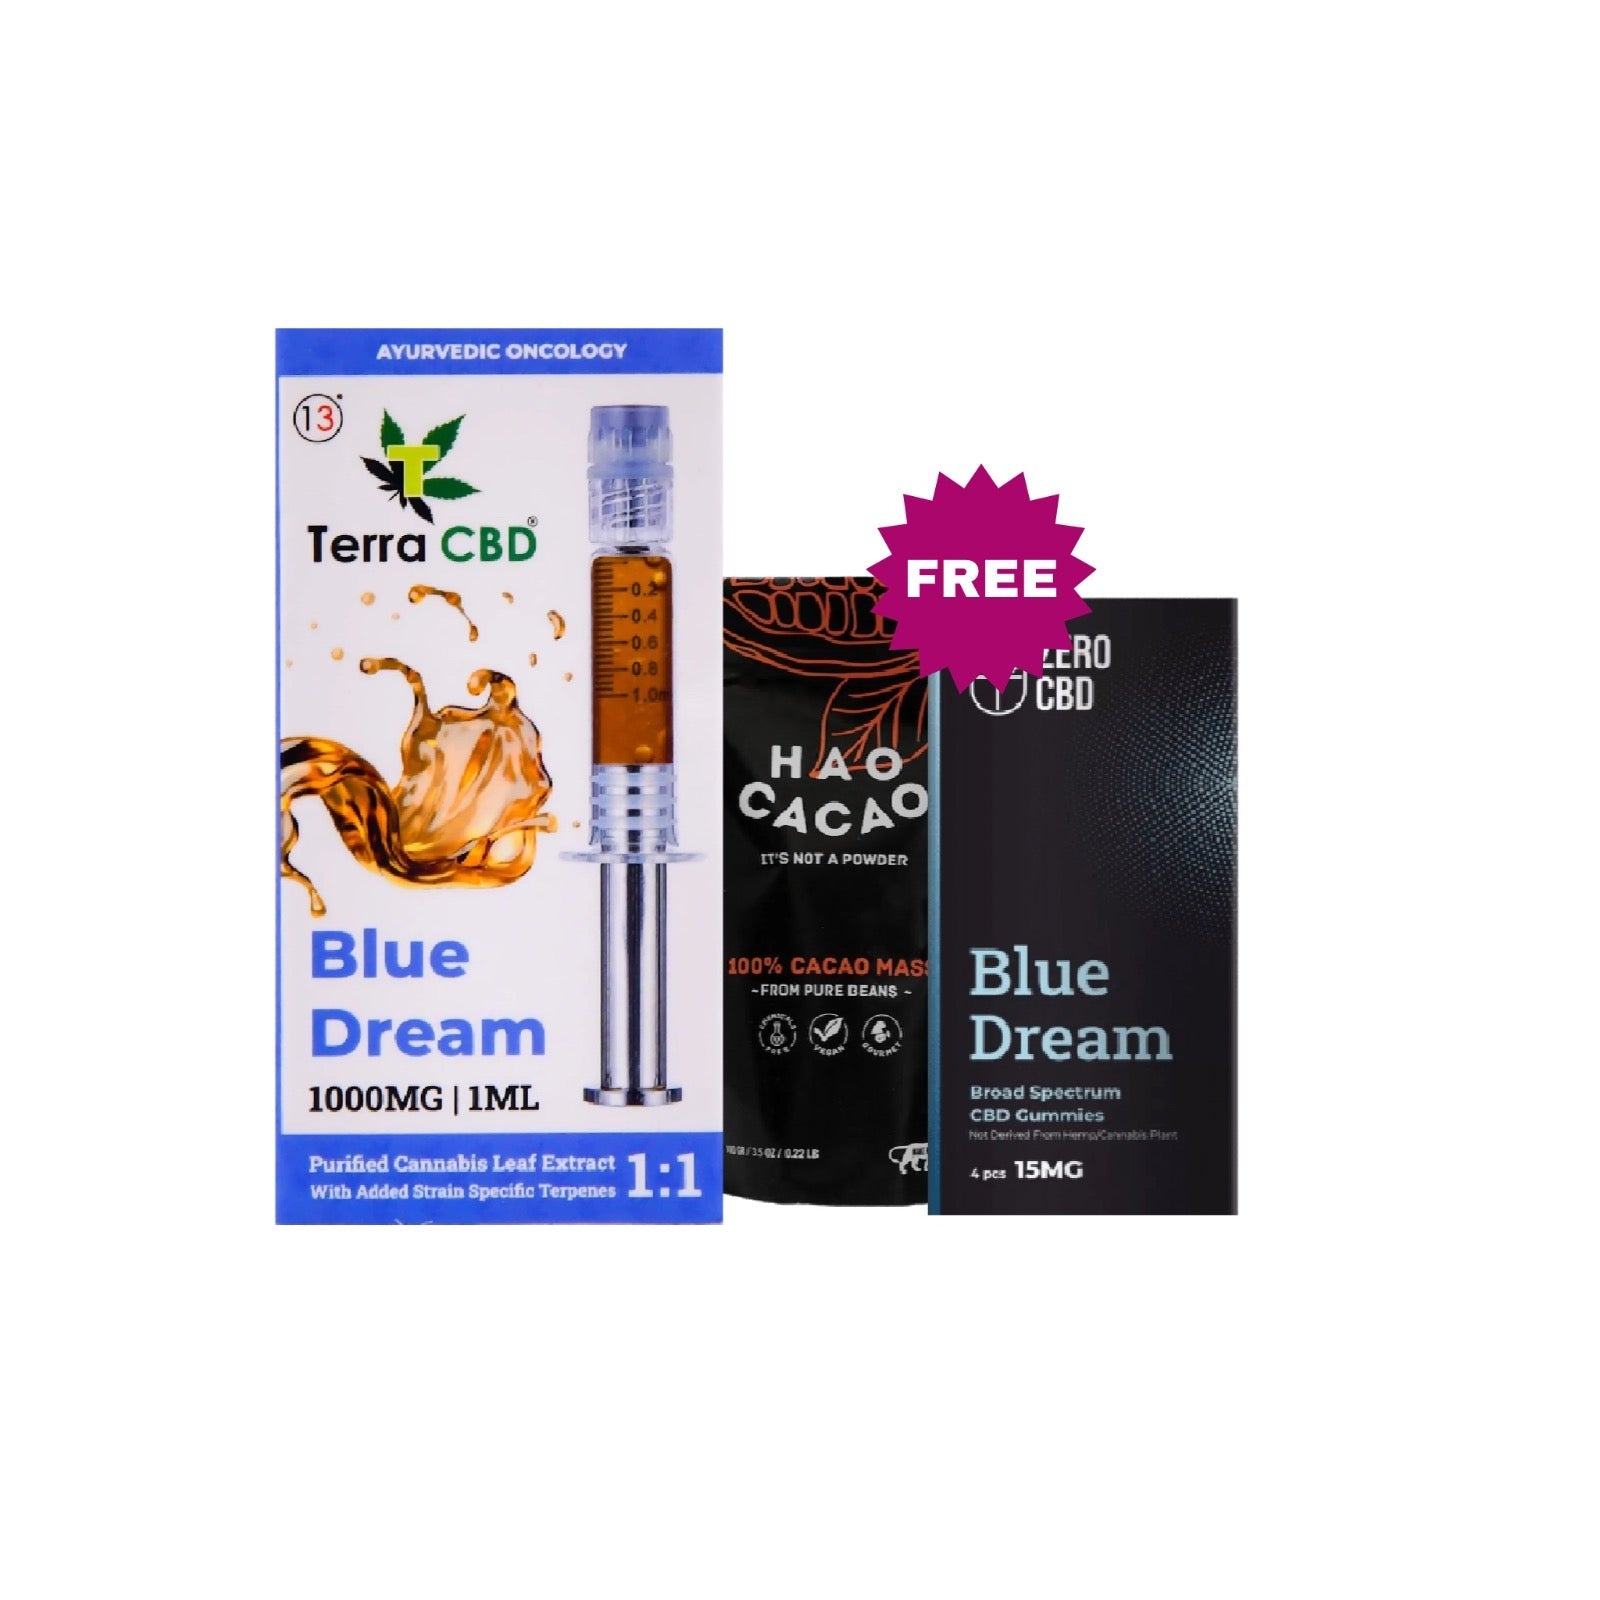 Special Offer - Free Cacao Mass and CBD Gummies with Blue Dream Cannabis Extract - CBD Store India